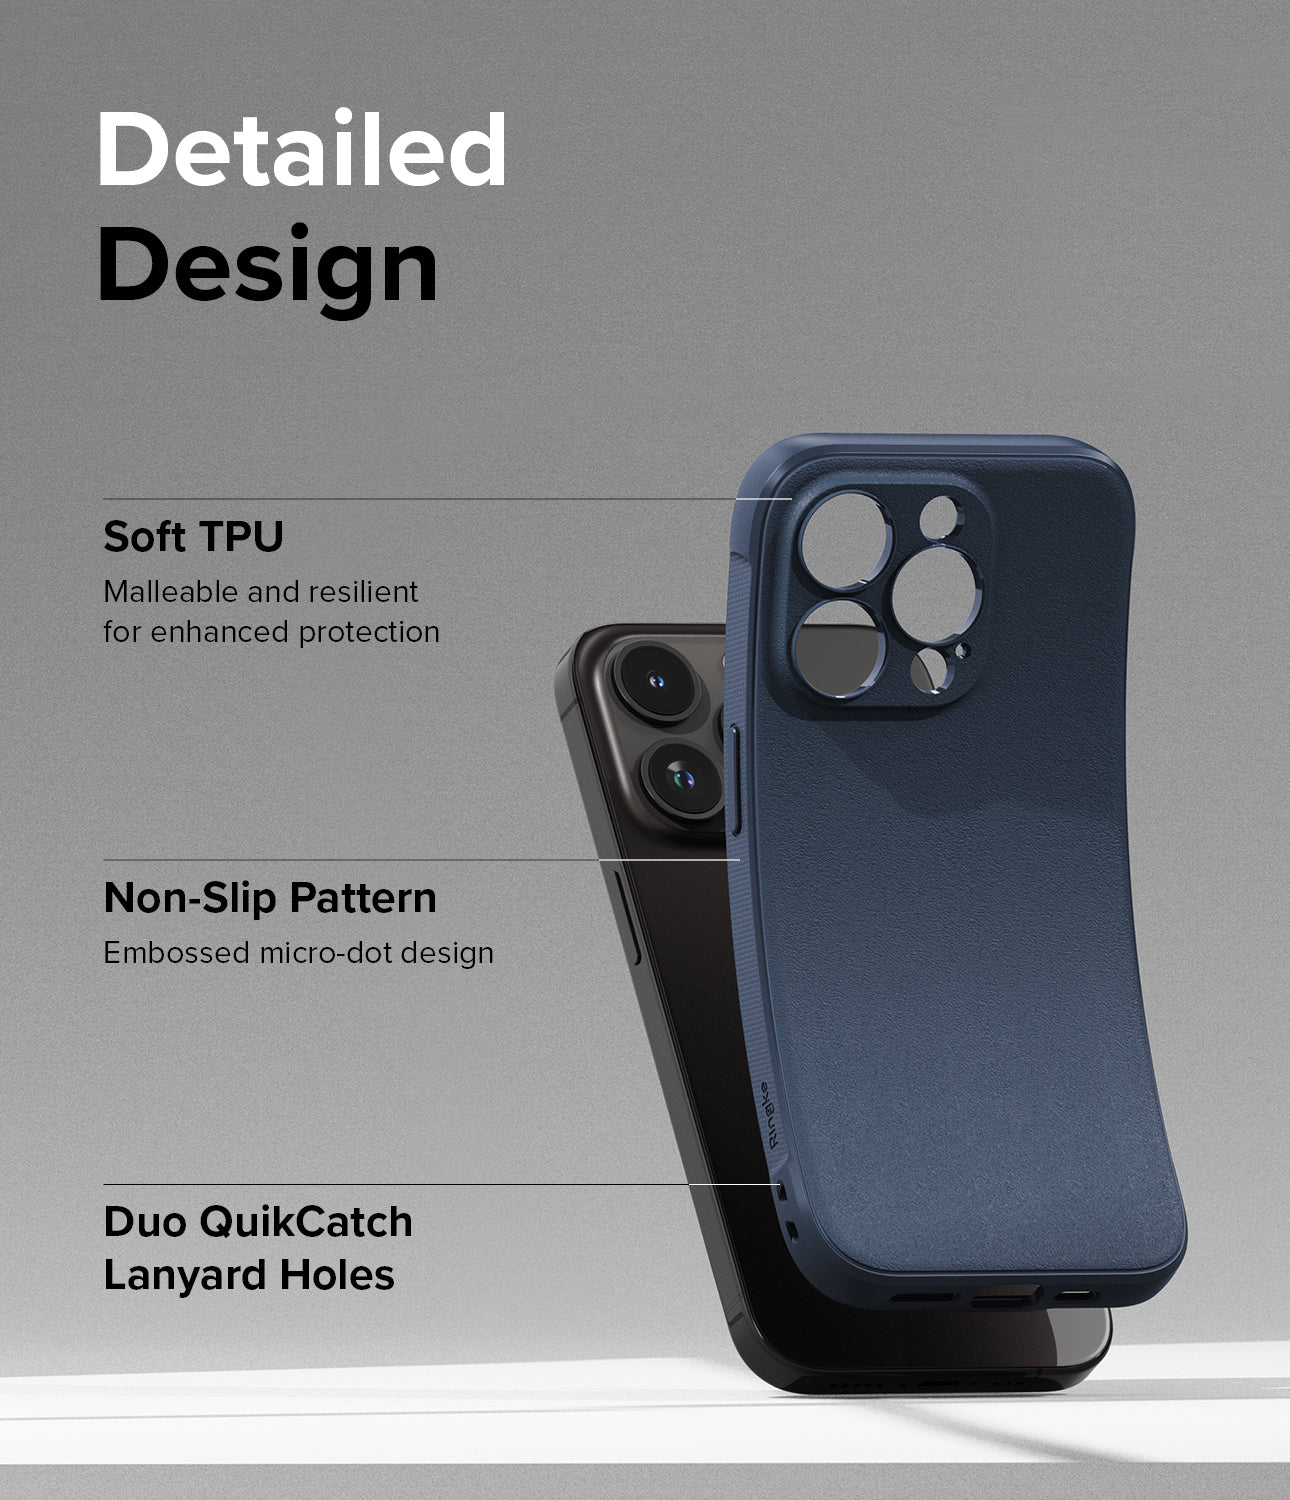 iPhone 15 Pro Case | Onyx - Navy - Detailed Design. Malleable and resilient for enhanced protection with Soft TPU. Embossed micro-dot design with Non-Slip Pattern. Duo QuikCatch Lanyard Holes.